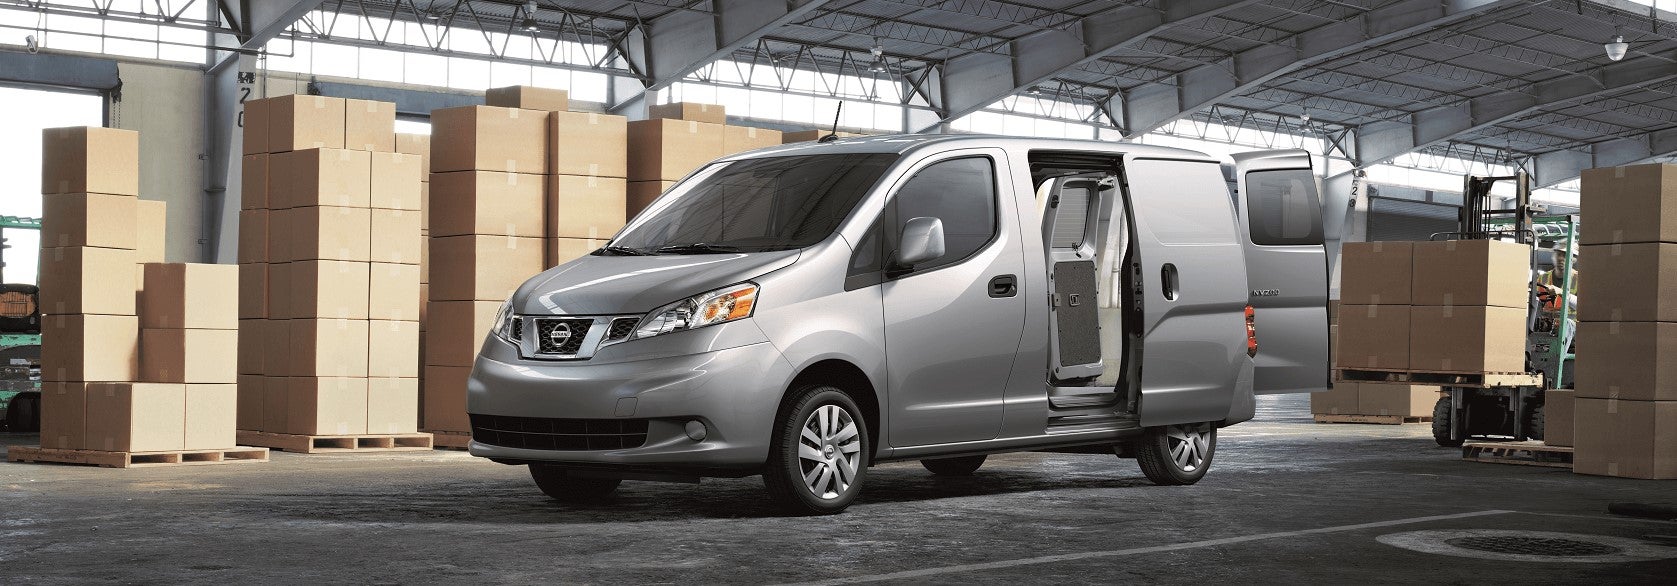 2020 Nissan NV200 Review Avon IN 